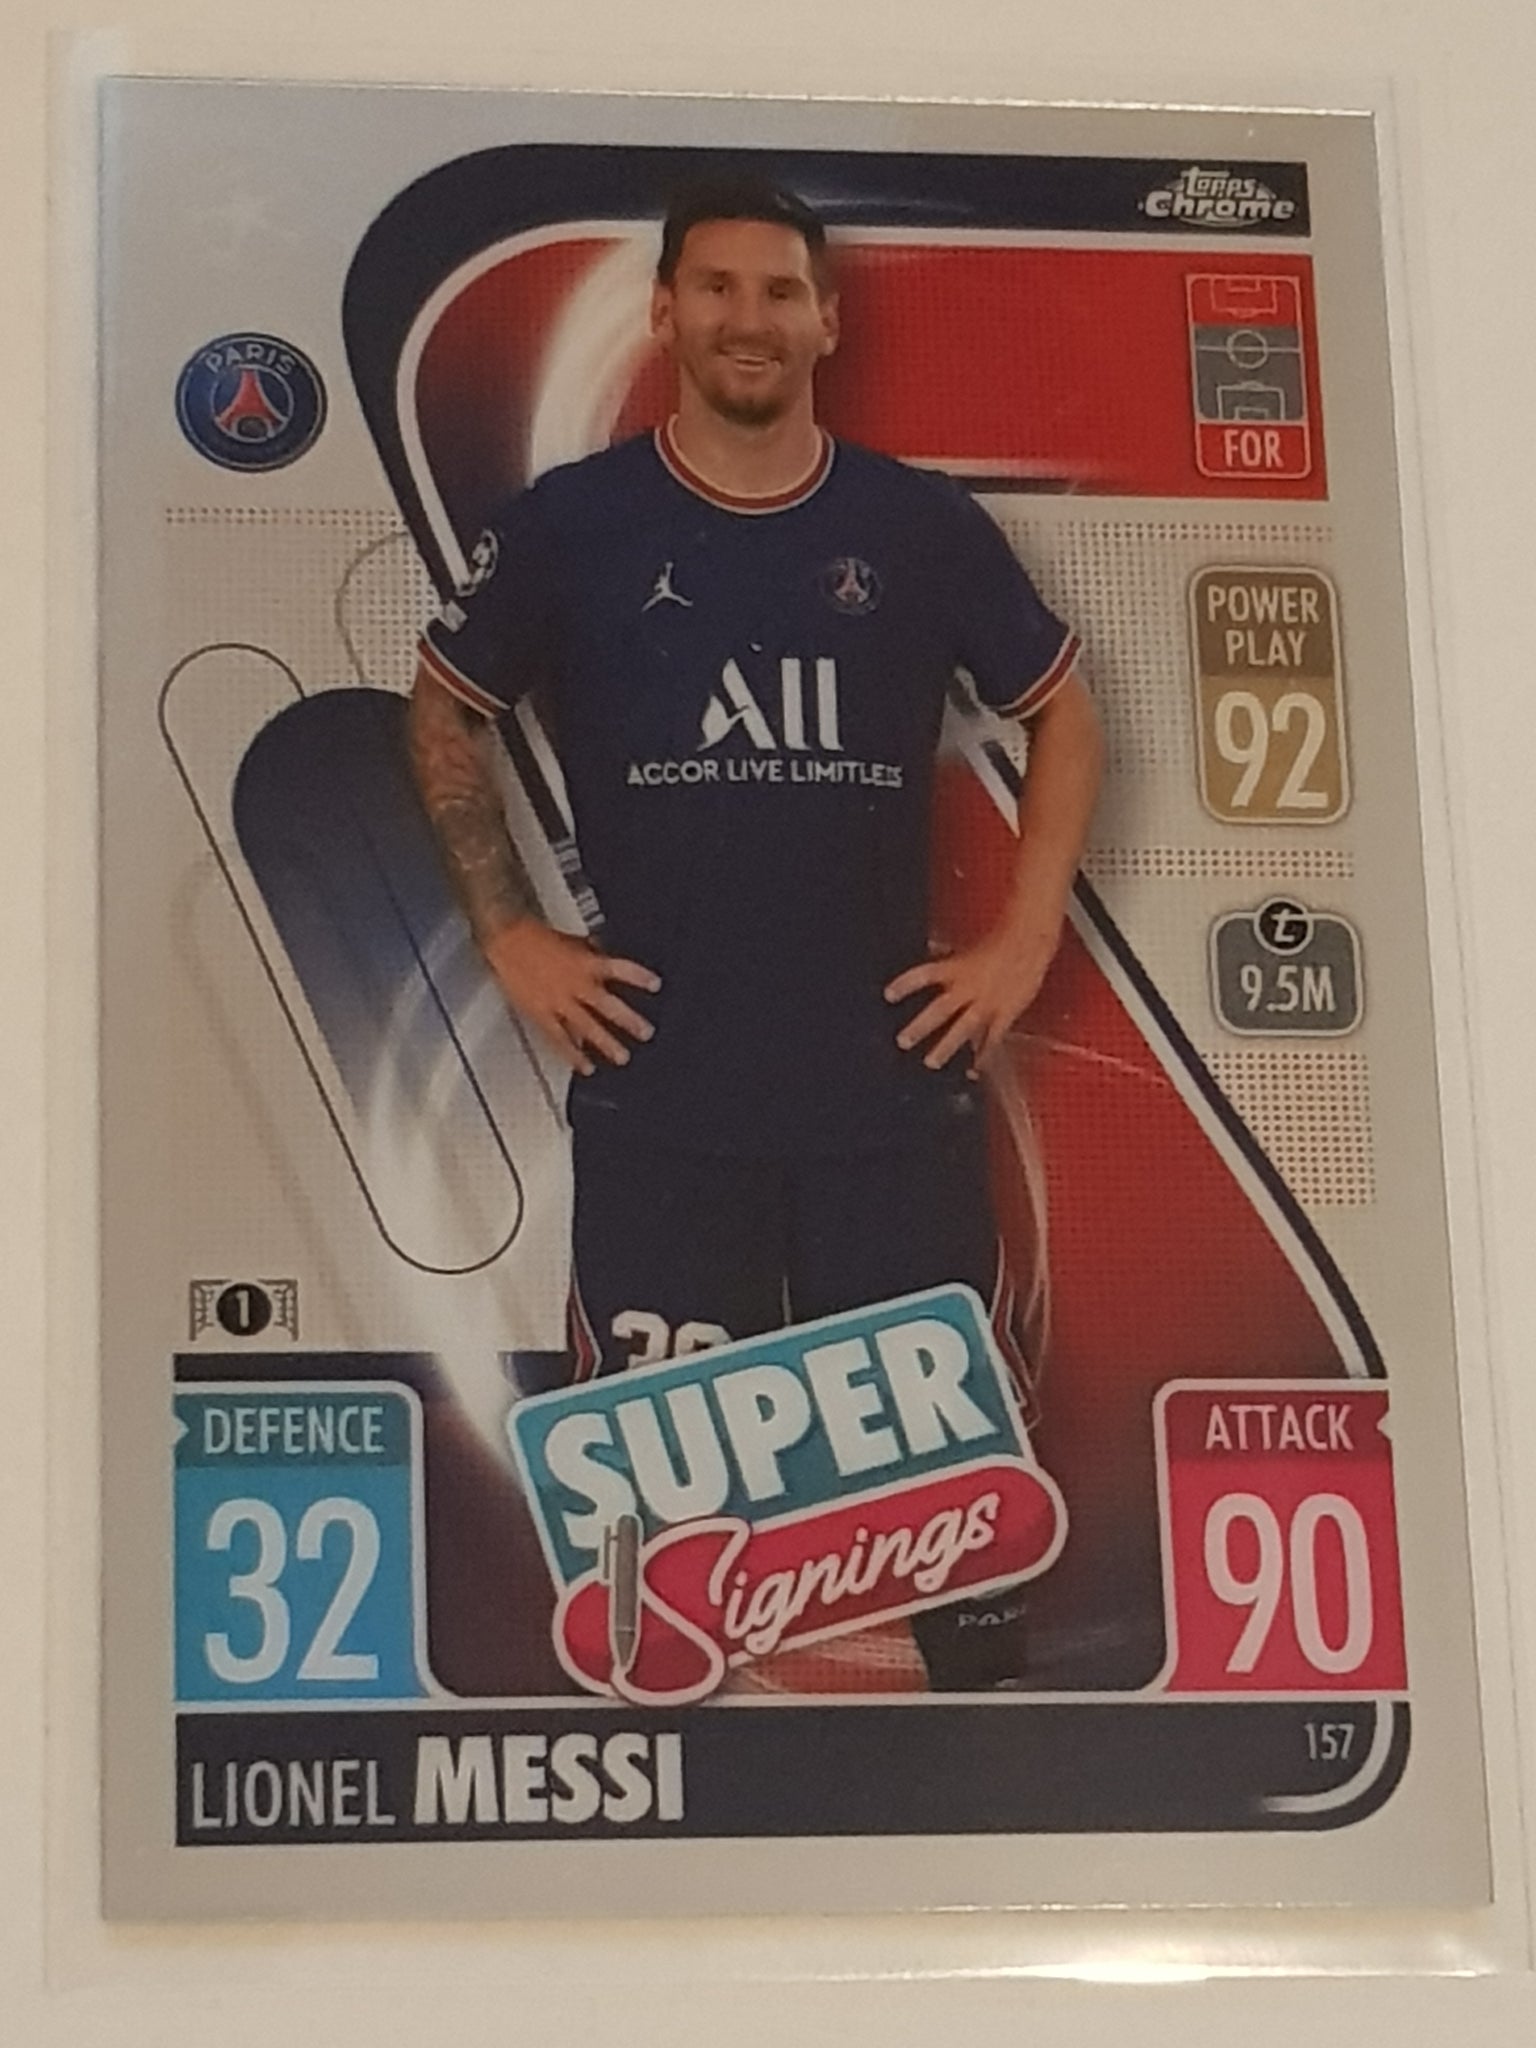 2021-22 Topps Chrome Match Attax UEFA Champions League Lionel Messi #157 Trading Card